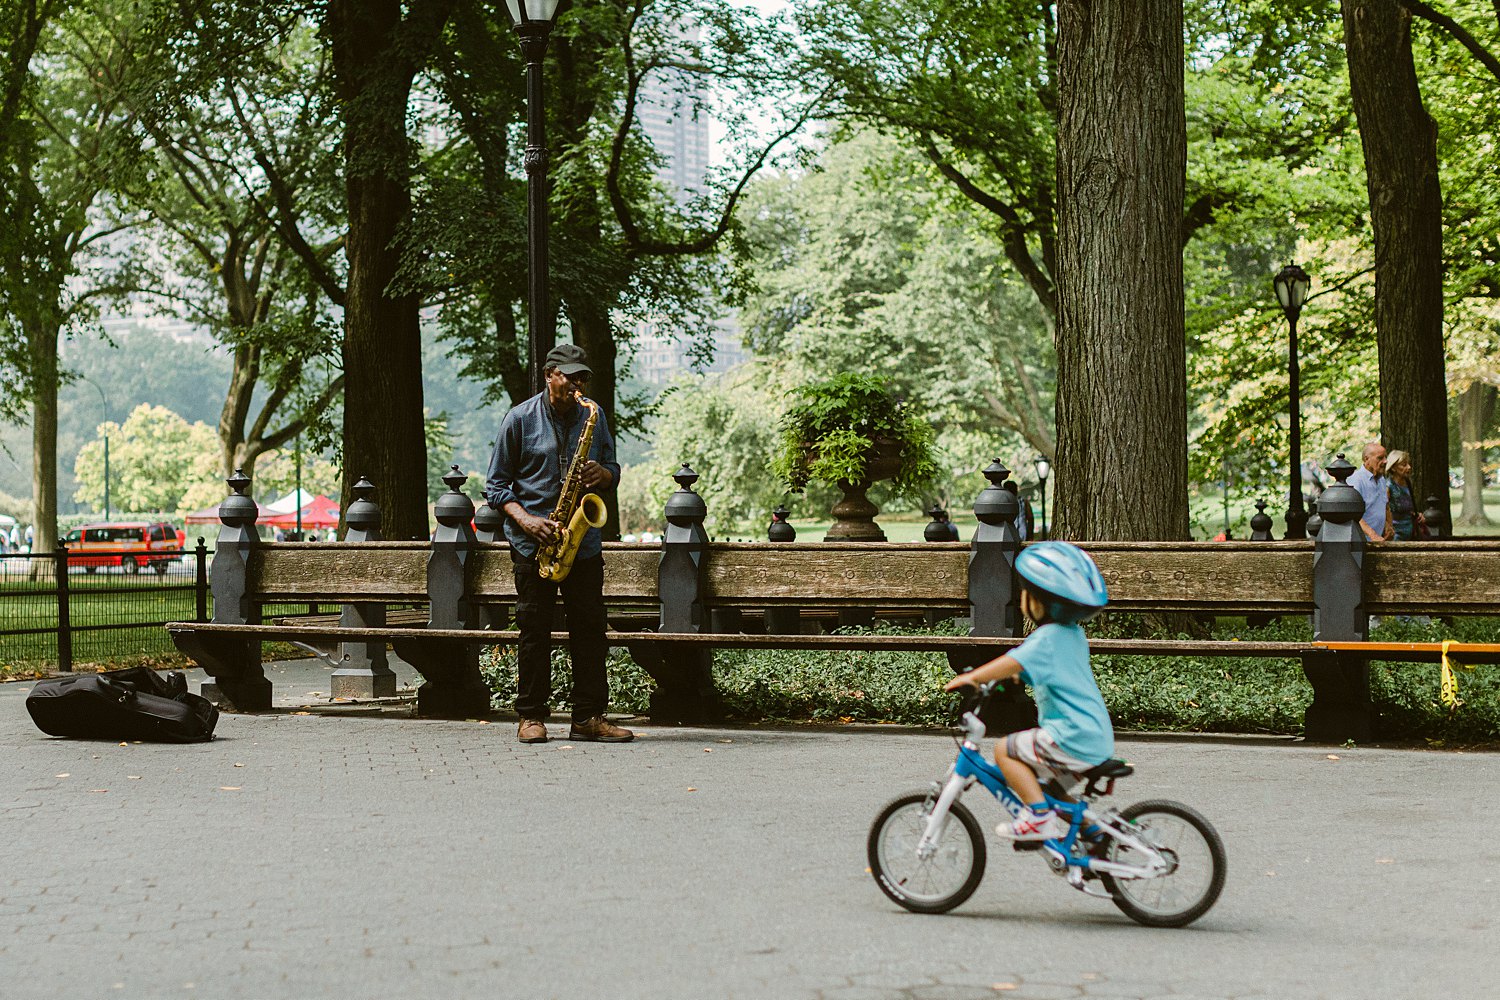 small child on bike passing man playing saxophone in central park nyc